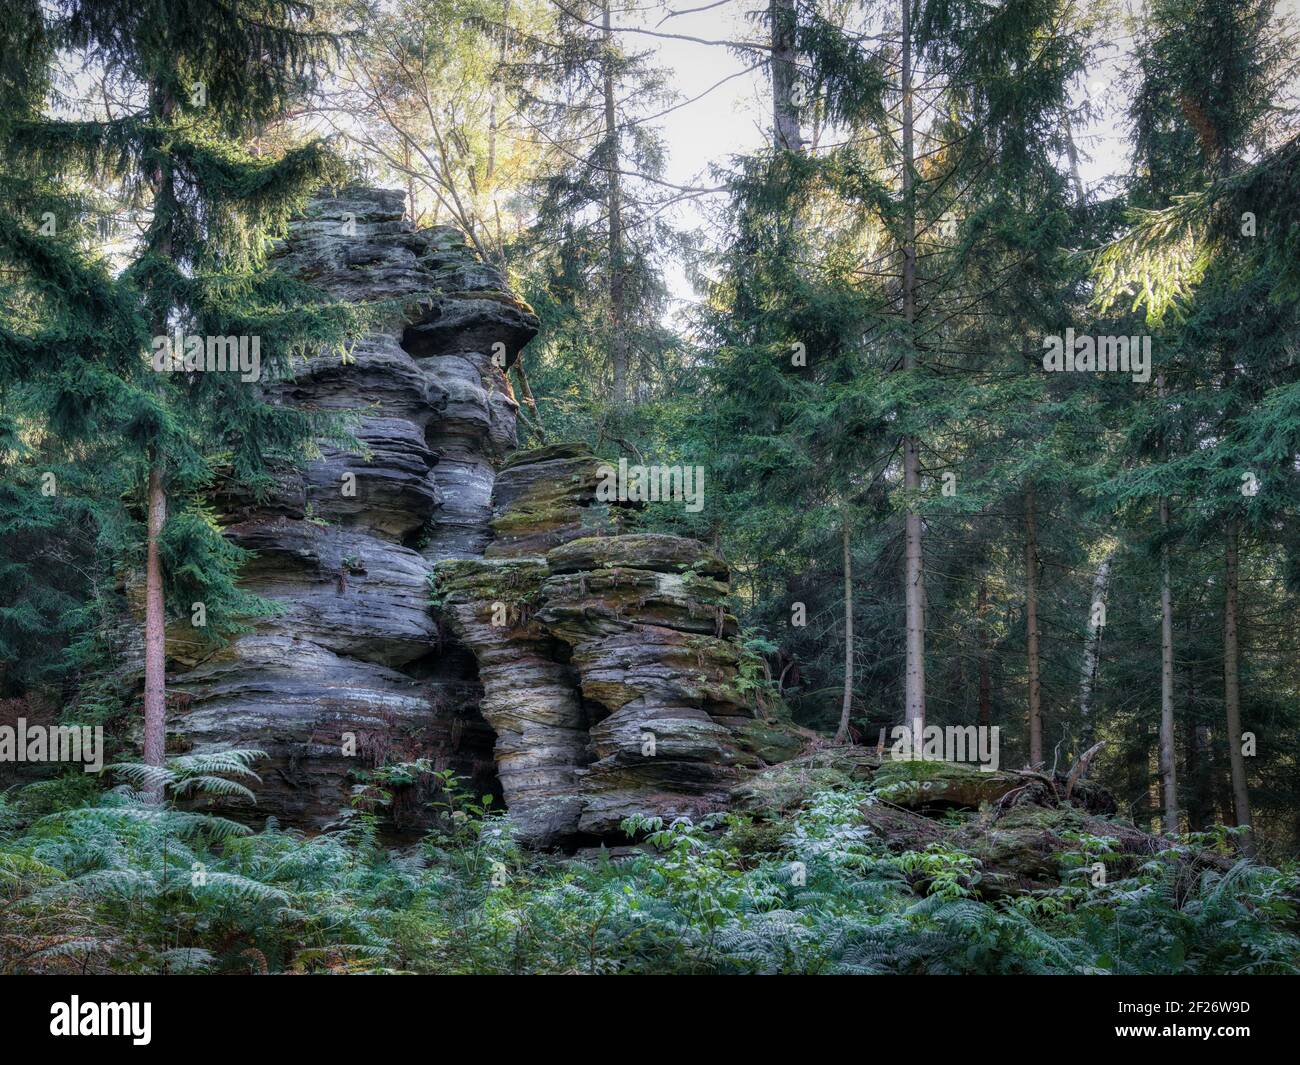 Sandstone rocks in the coniferous forest. Saxon Switzerland, Germany, Saxony. Enchanting atmosphere in the dense forest. Sandsteinfelsen im Nadelwald. Stock Photo